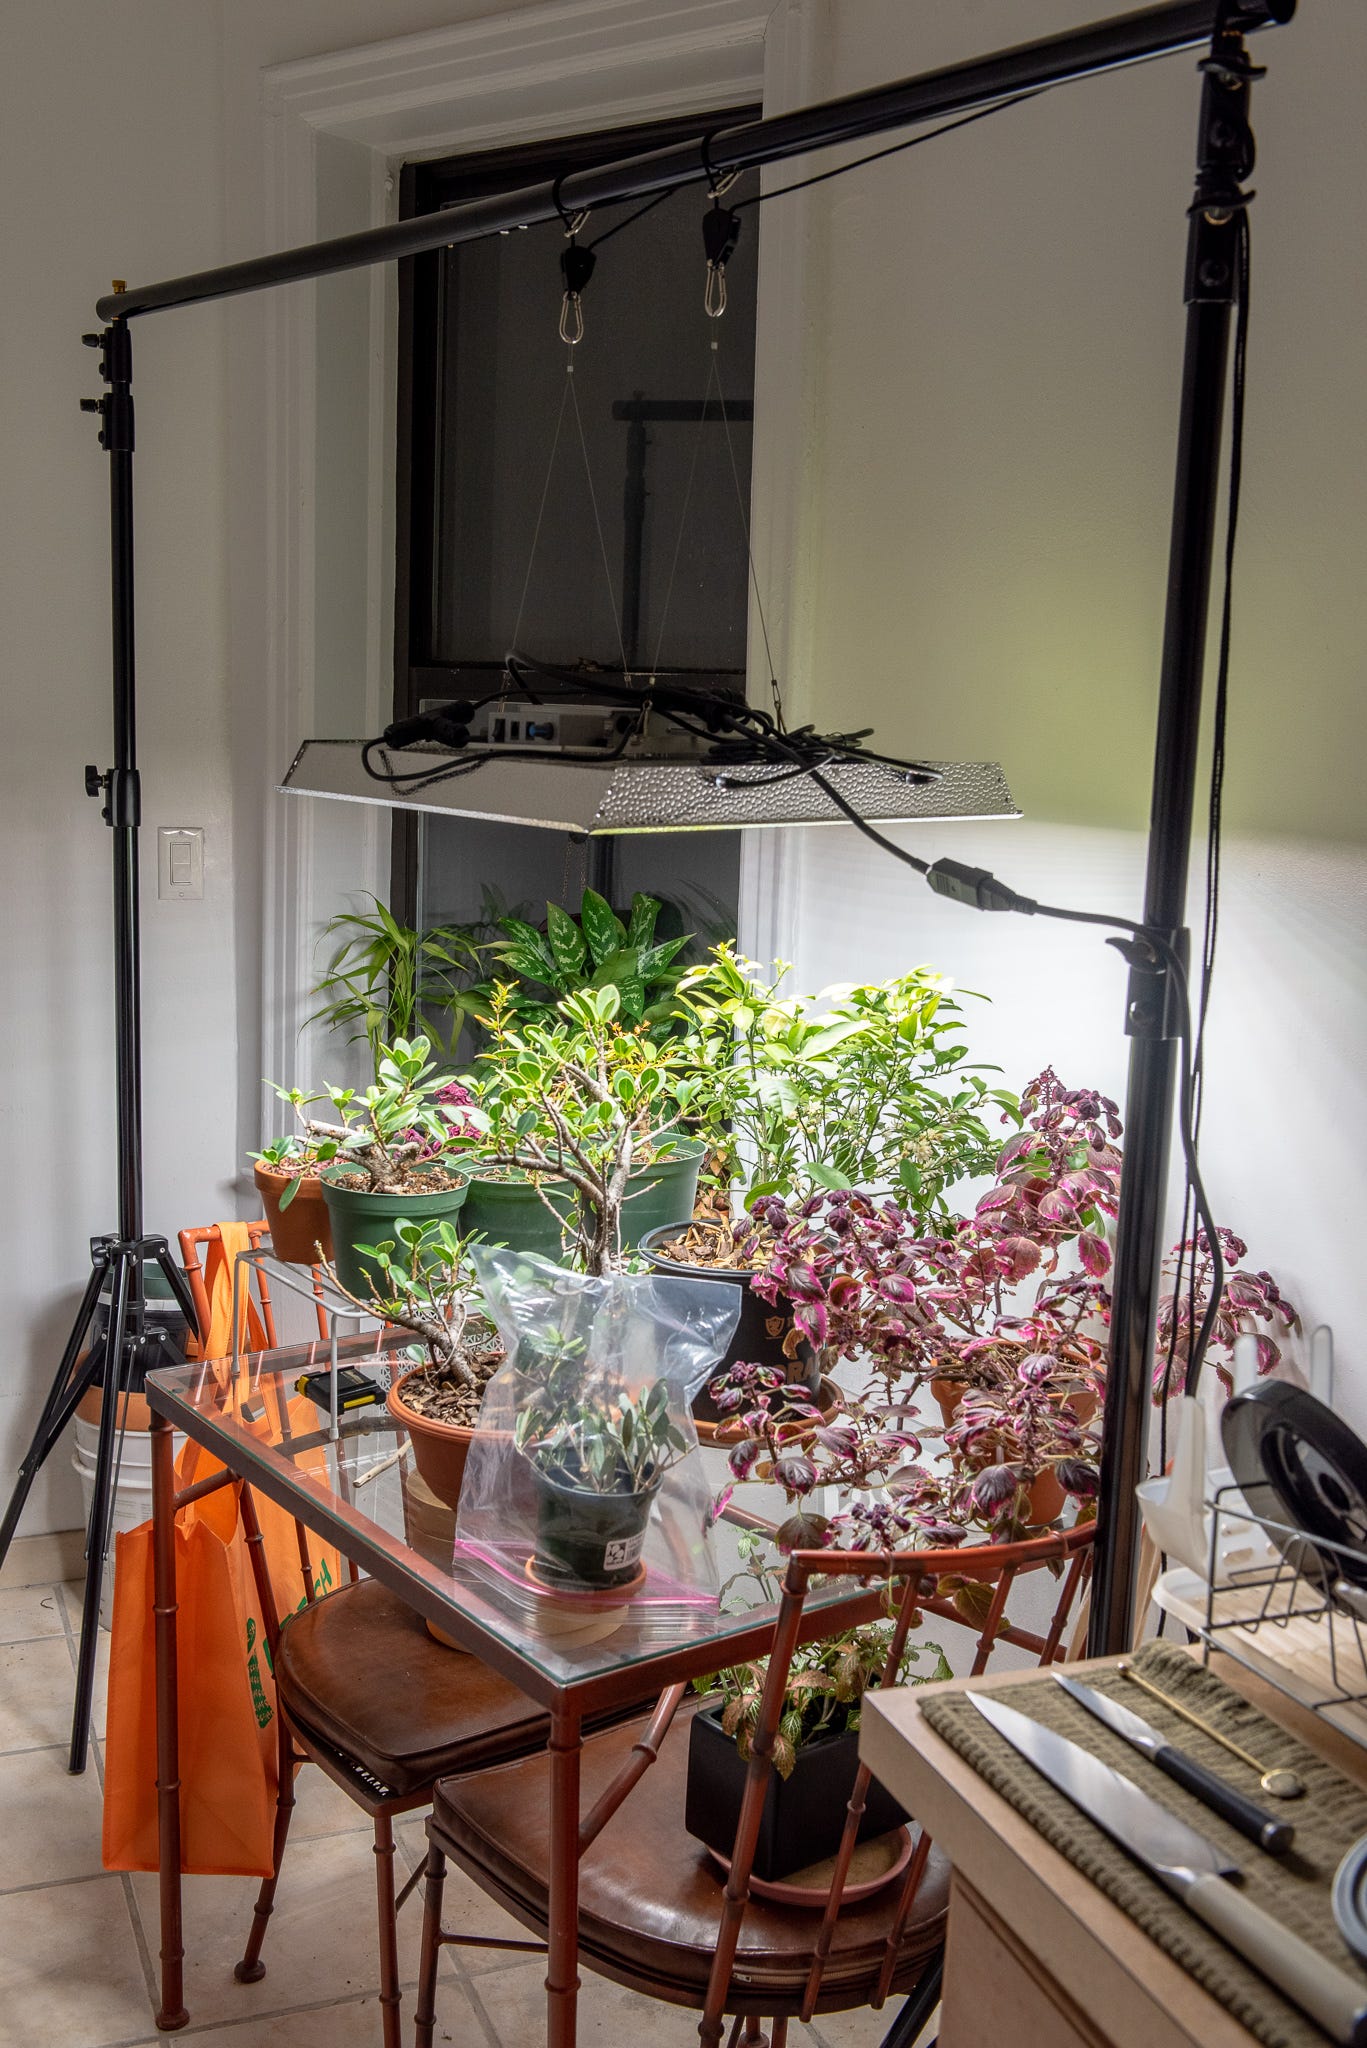 My indoor bonsai setup, part 1 - by Max Falkowitz